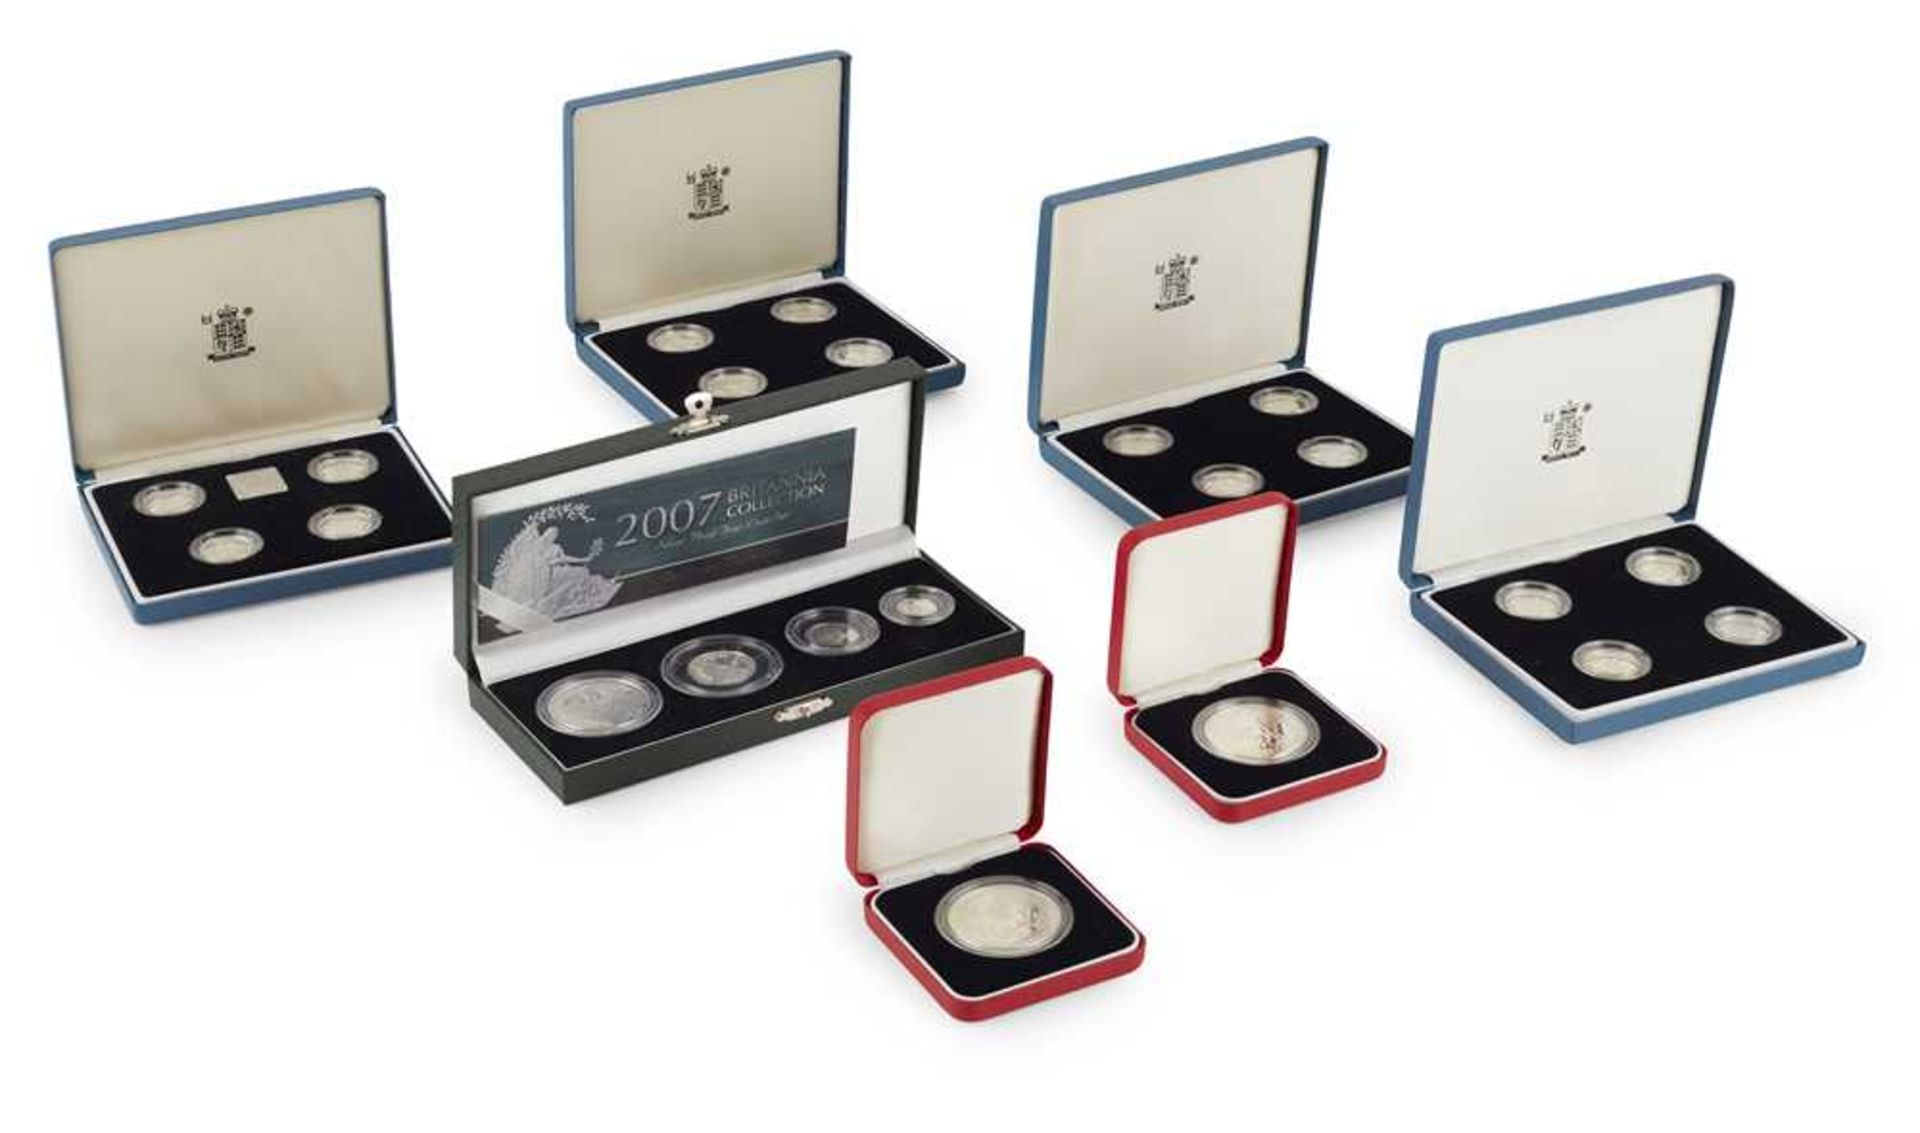 A collection of Royal Mint silver proof £1 coin sets